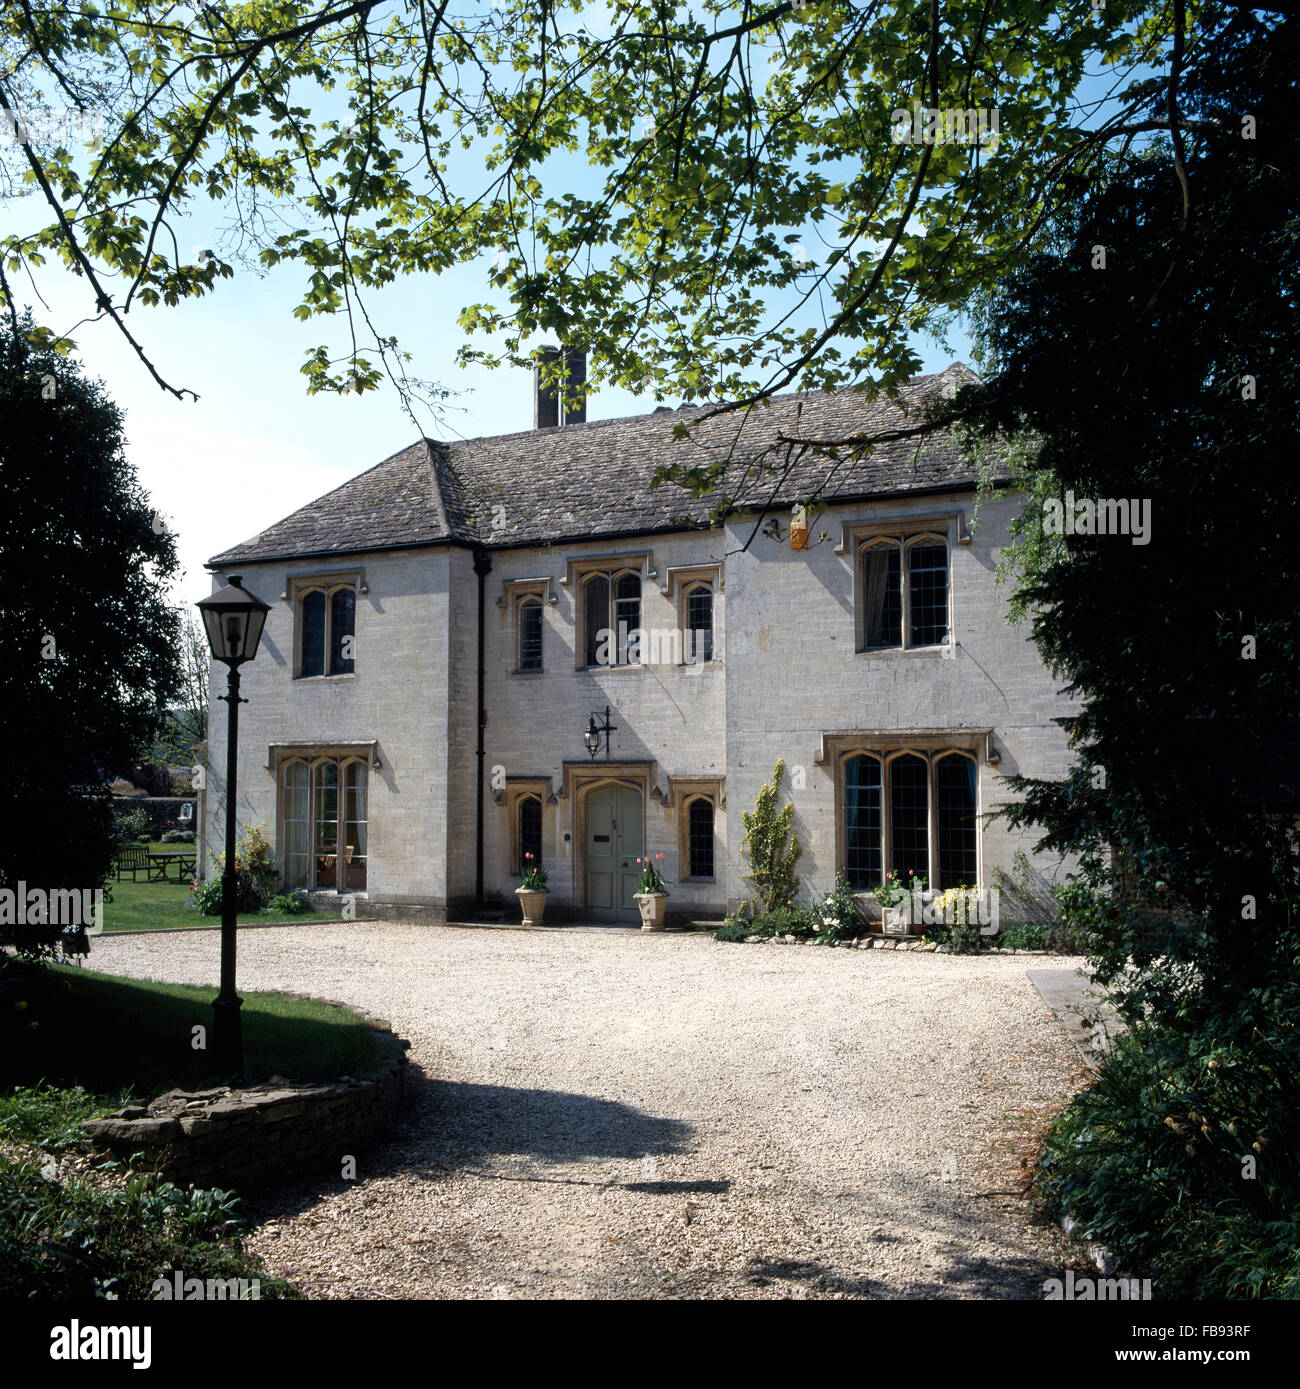 Exterior of a large old country house Stock Photo